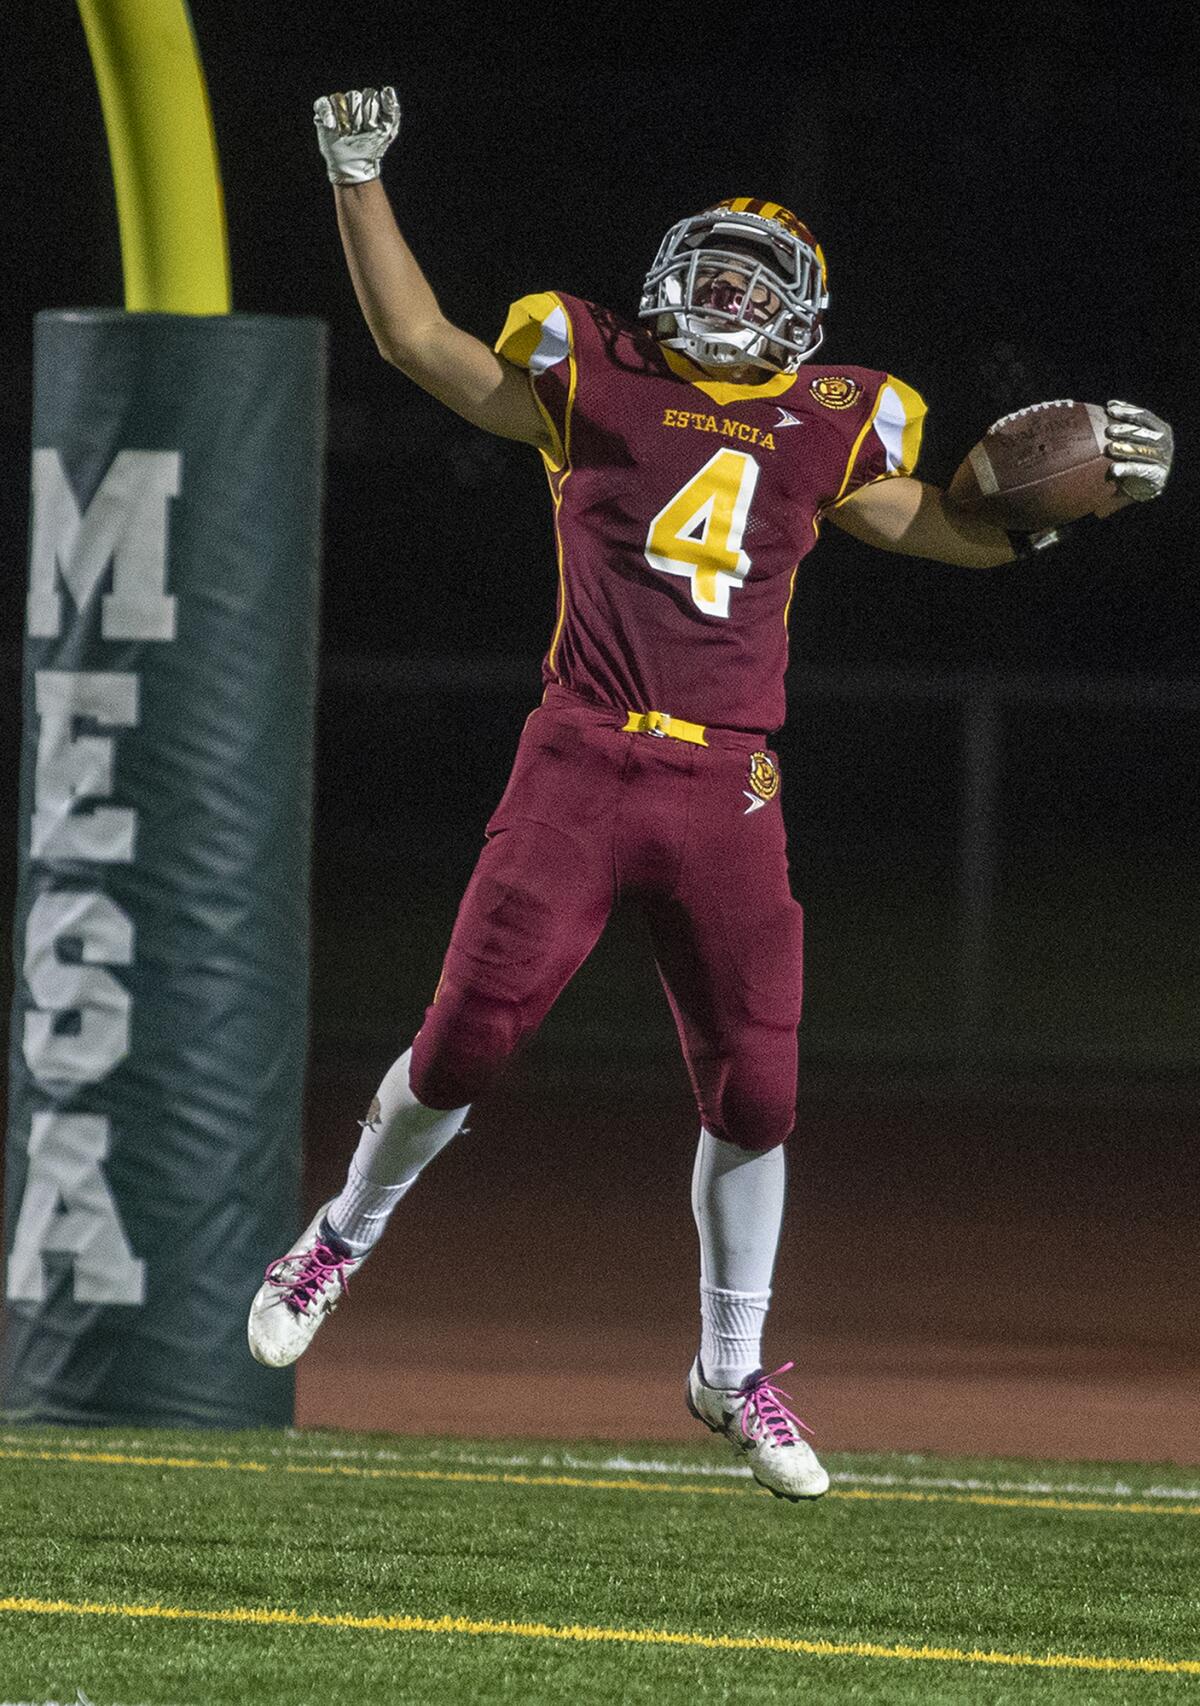 Estancia's Tony Valdez celebrates after catching a 43-yard touchdown in the first quarter against Saddleback during an Orange Coast League game at Cost Mesa High on Thursday.